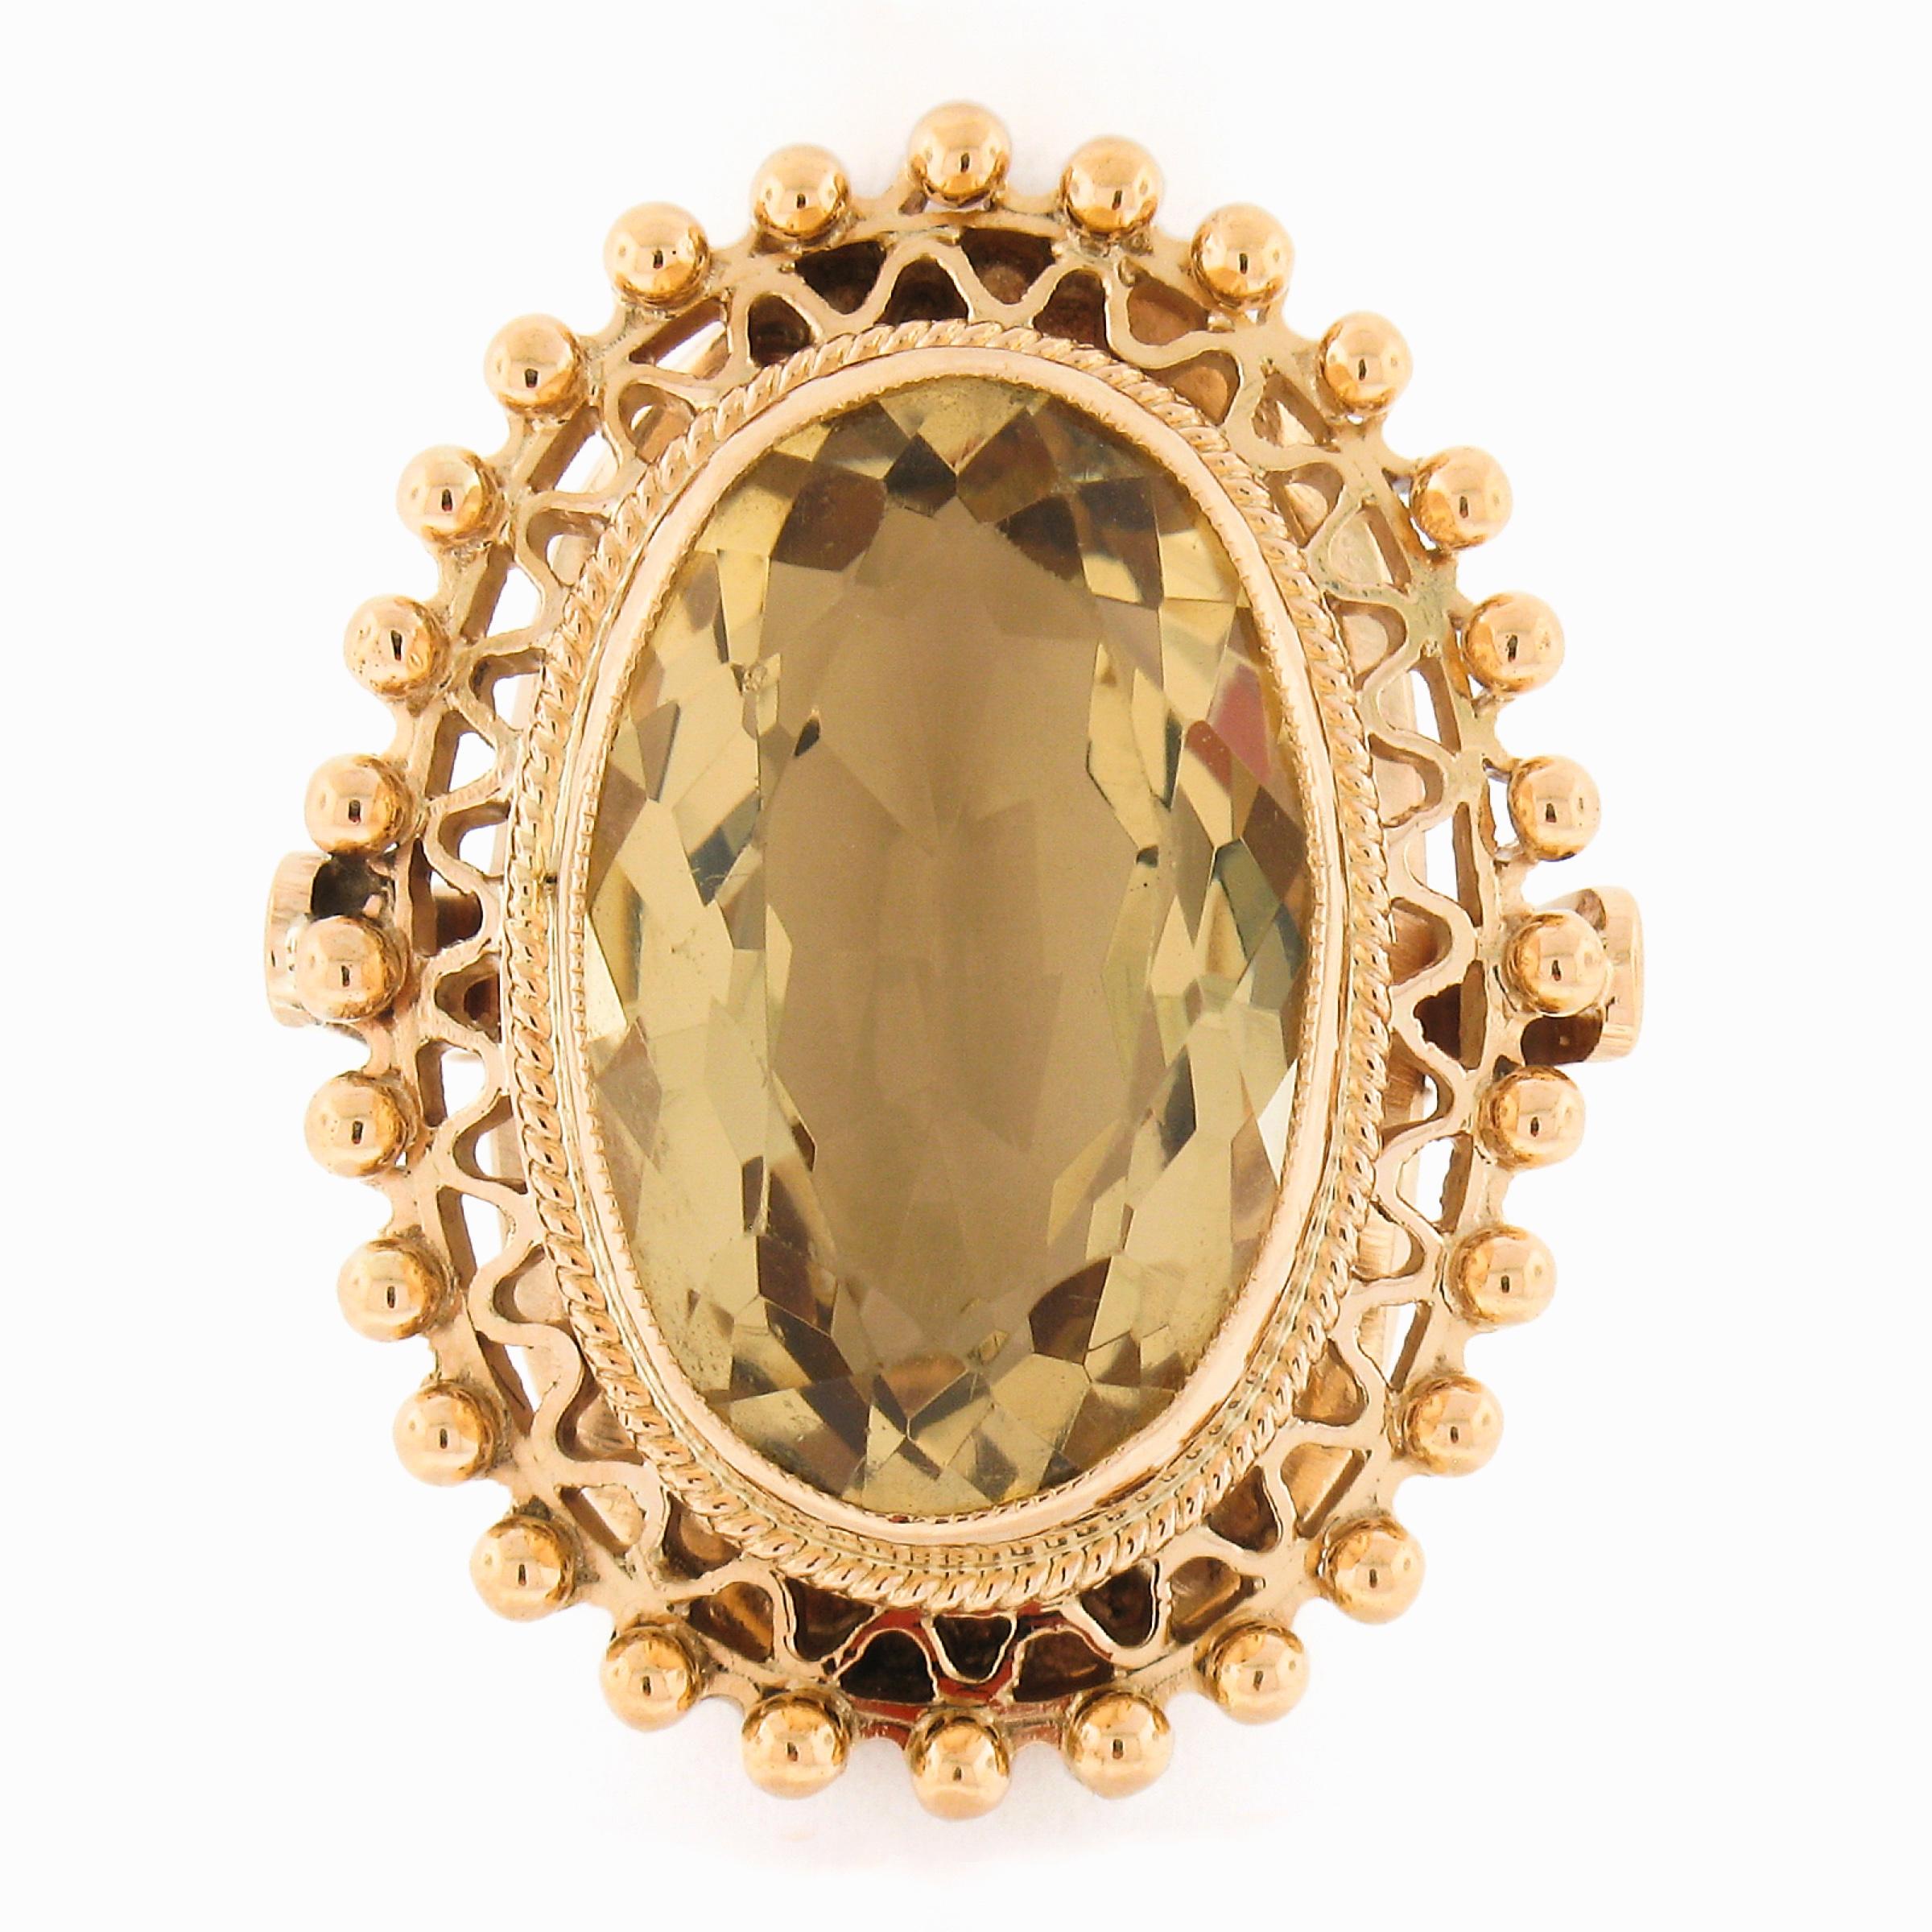 This absolutely gorgeous and well made vintage platter ring is solidly crafted from 18k yellow gold and features a large oval brilliant citrine stone neatly bezel set at its center. The stunning stone is a very fine and fiery golden brown color that